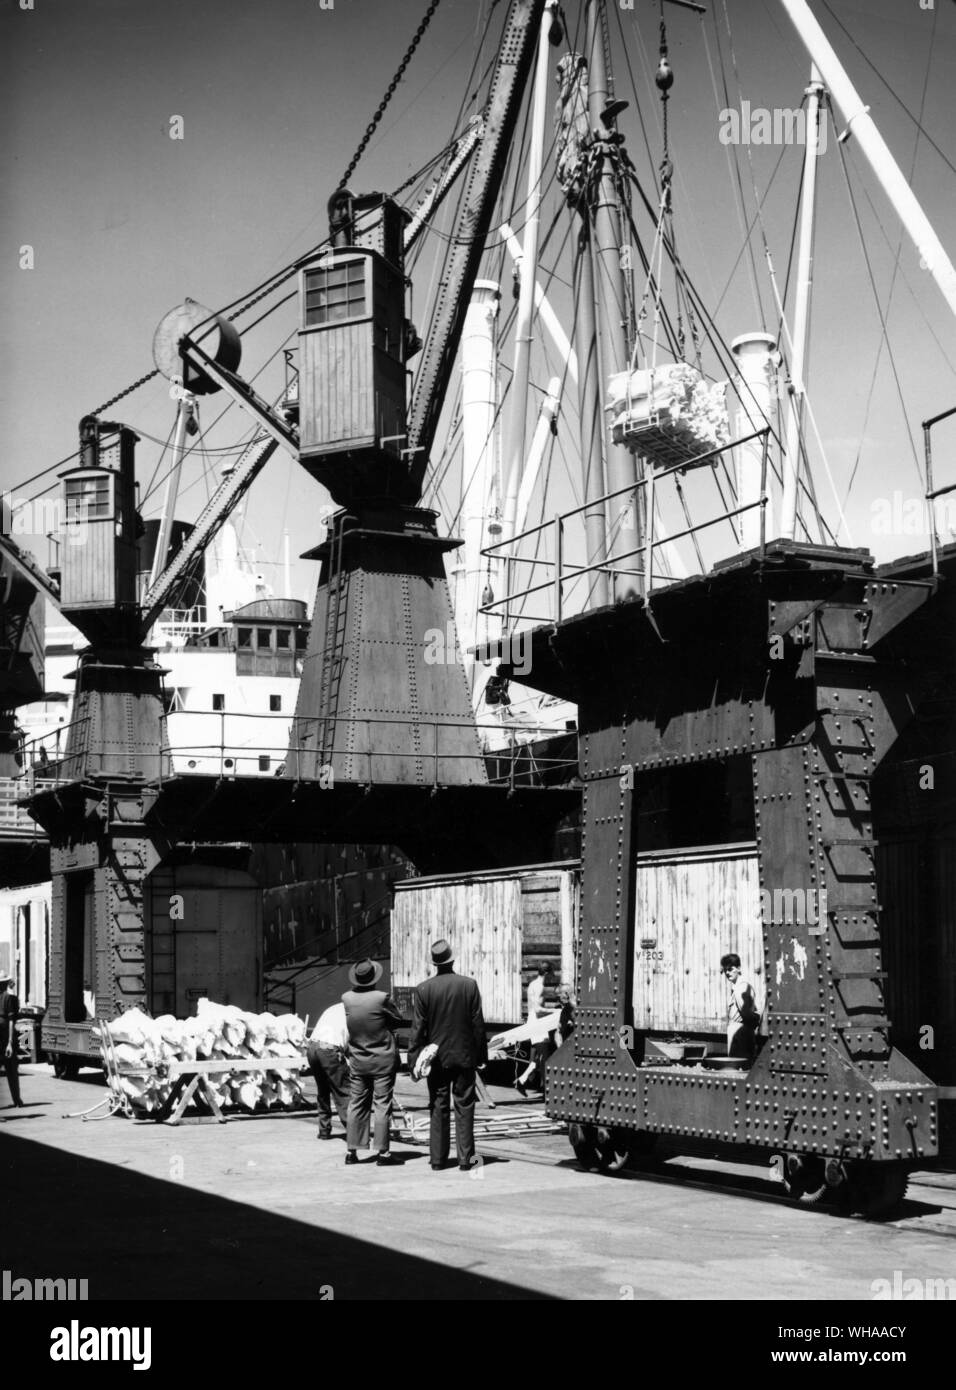 Loading frozen mutton on an overseas vessel at Wellington, New Zealand. The carcasses are loaded onto refigerated railway trucks beside the ship to the waiting refrigerated holds. July 1963 Stock Photo